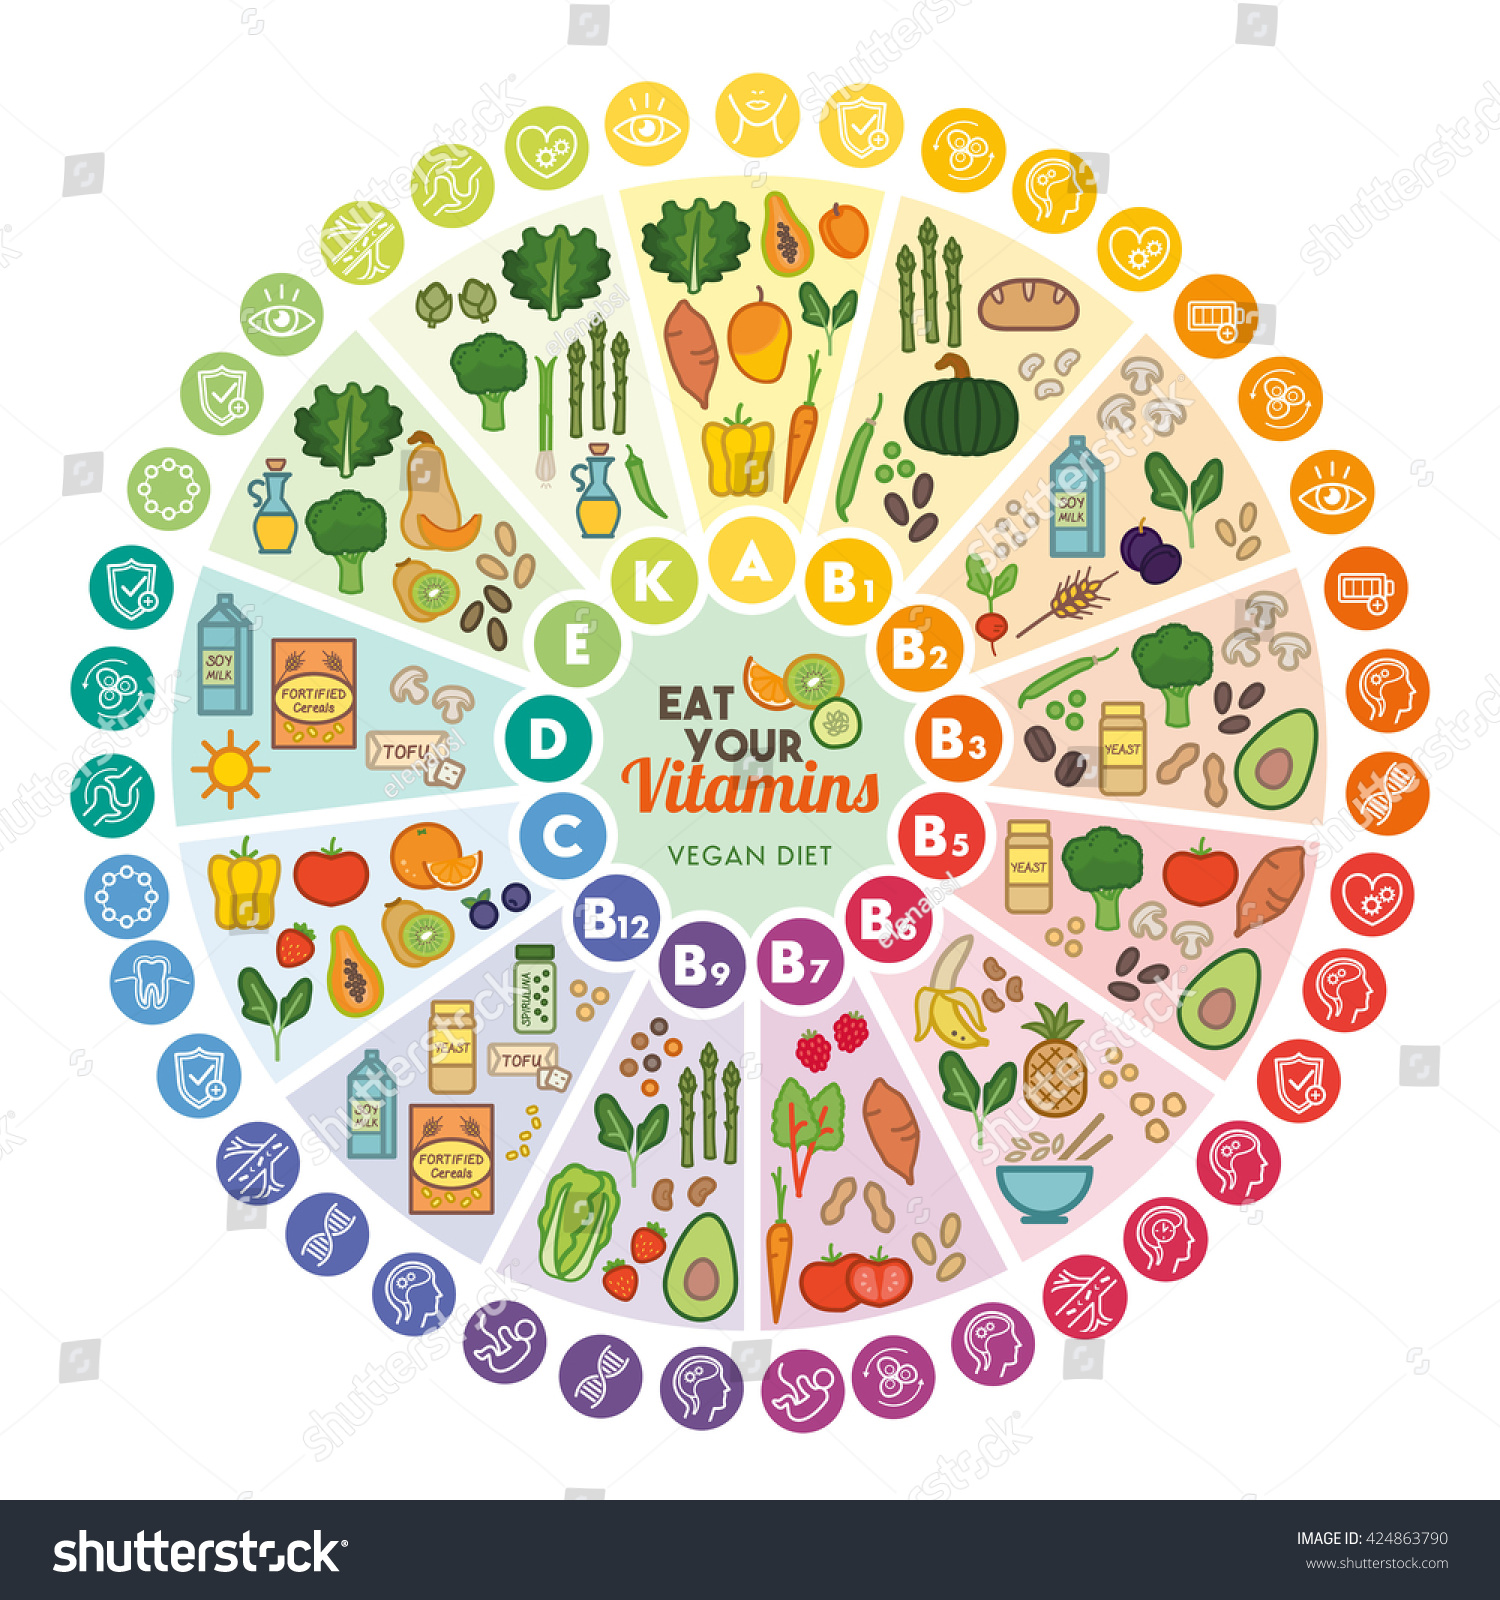 Vitamin Vegan Food Sources And Functions, Rainbow Wheel Chart With Food ...